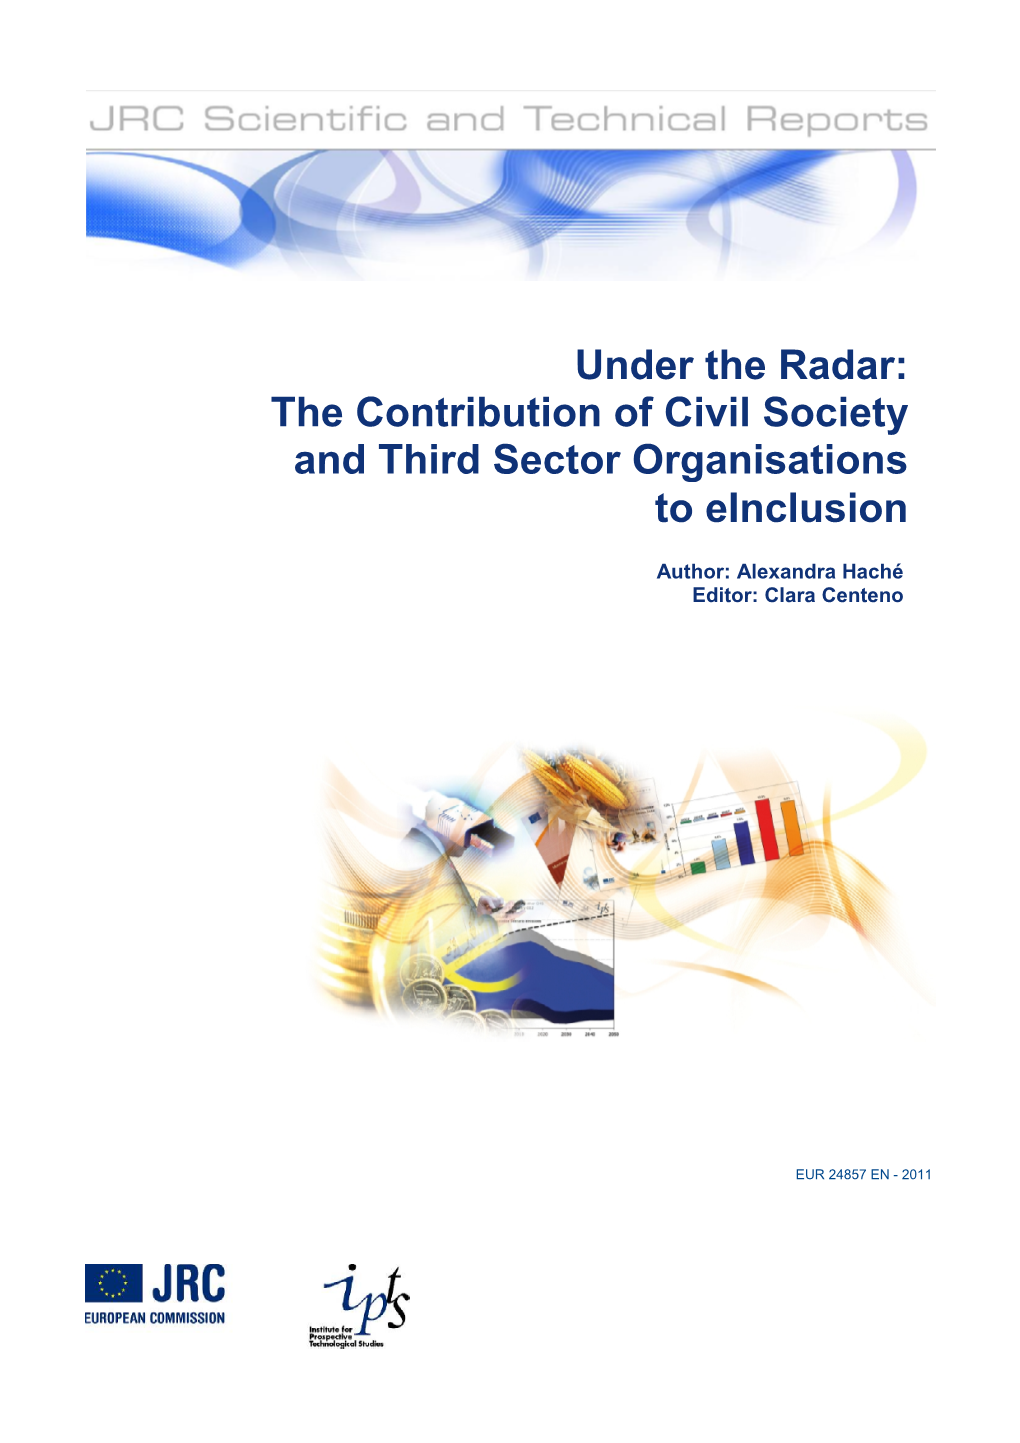 The Contribution of Civil Society and Third Sector Organisations to Einclusion